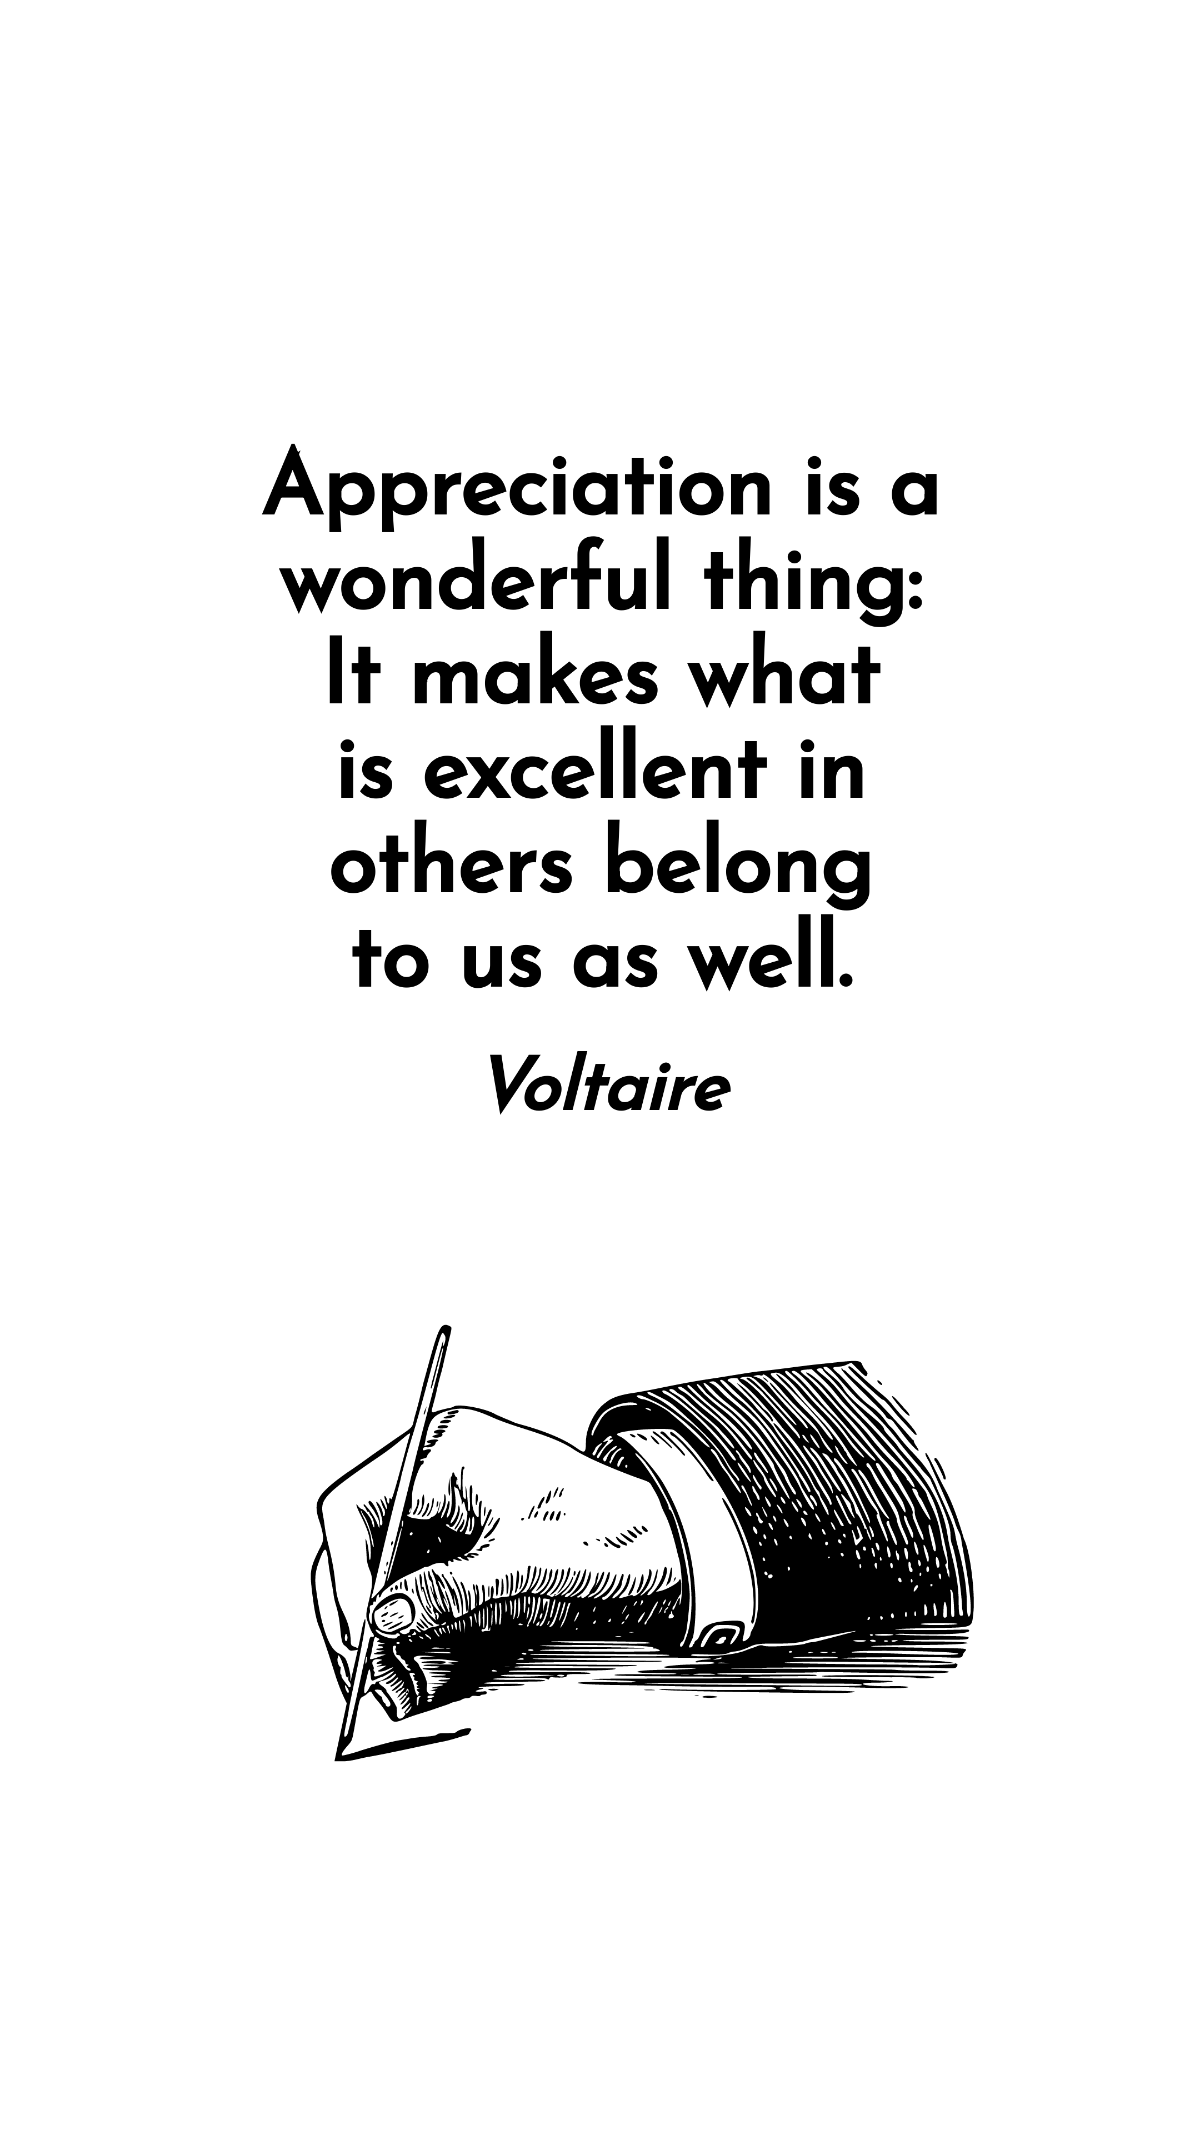 Voltaire - Appreciation is a wonderful thing: It makes what is excellent in others belong to us as well. Template